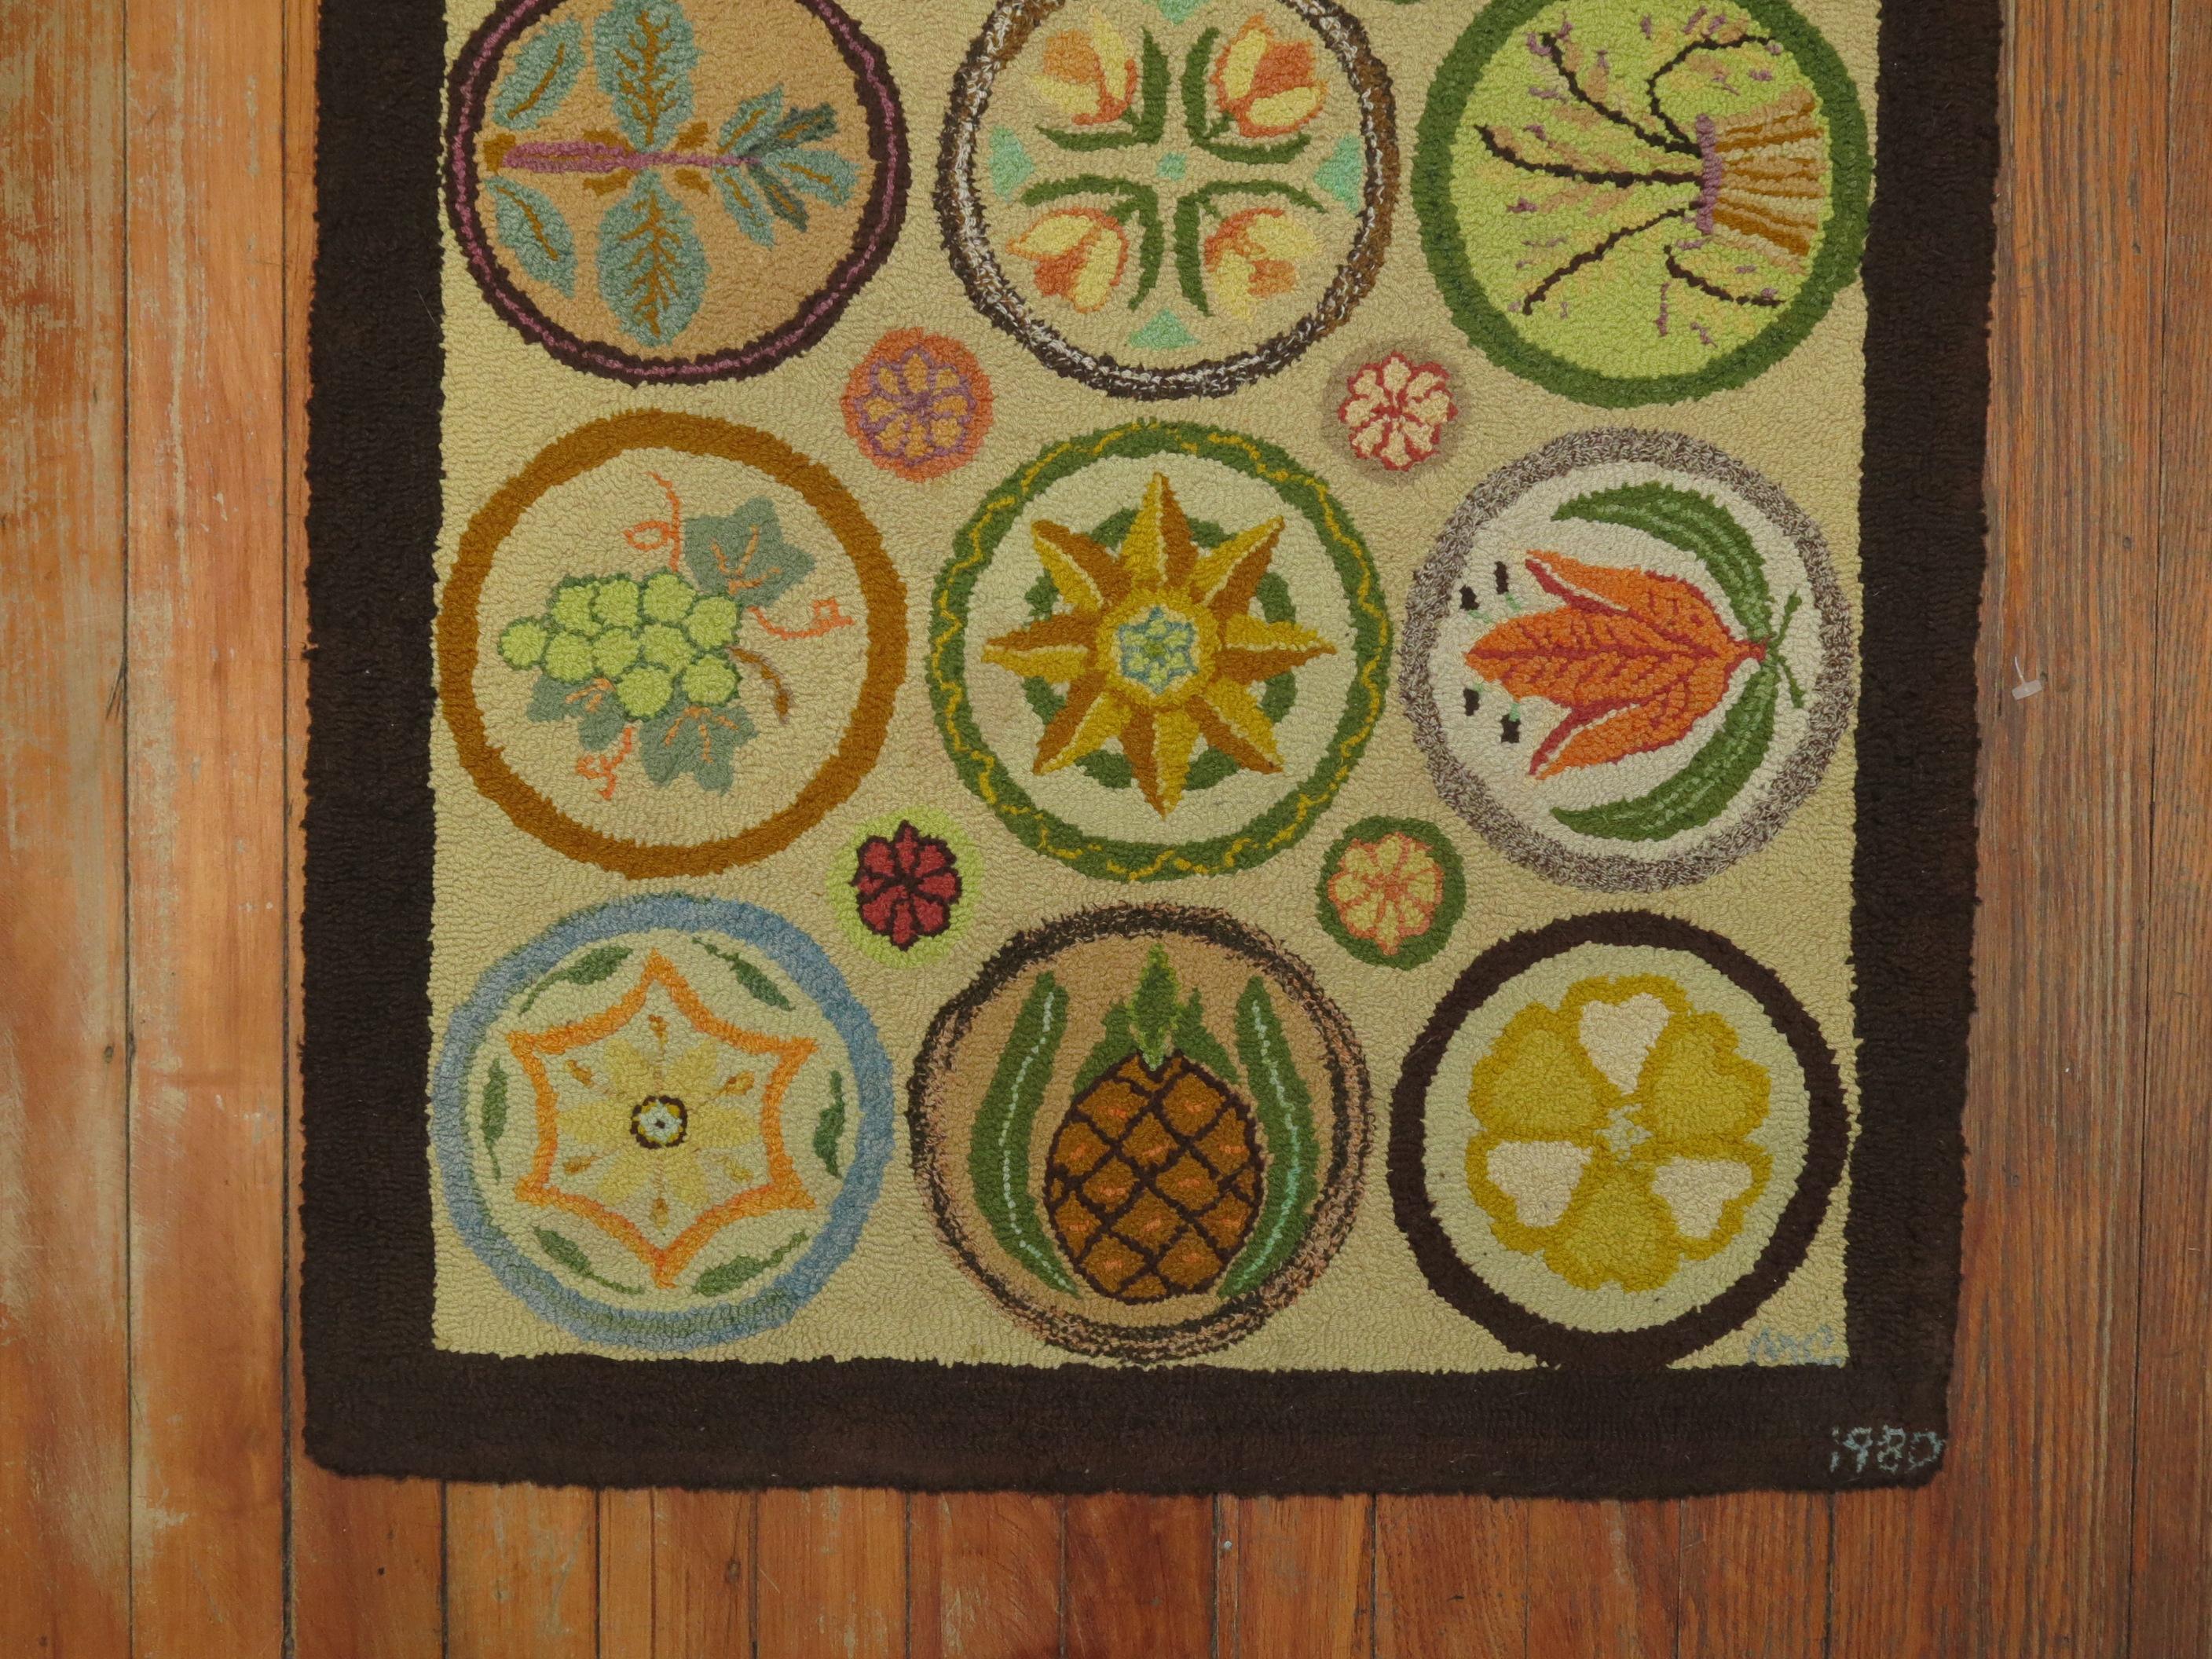 Hand-Woven Folksy Pictorial Vintage American Hooked Mat Size Rug